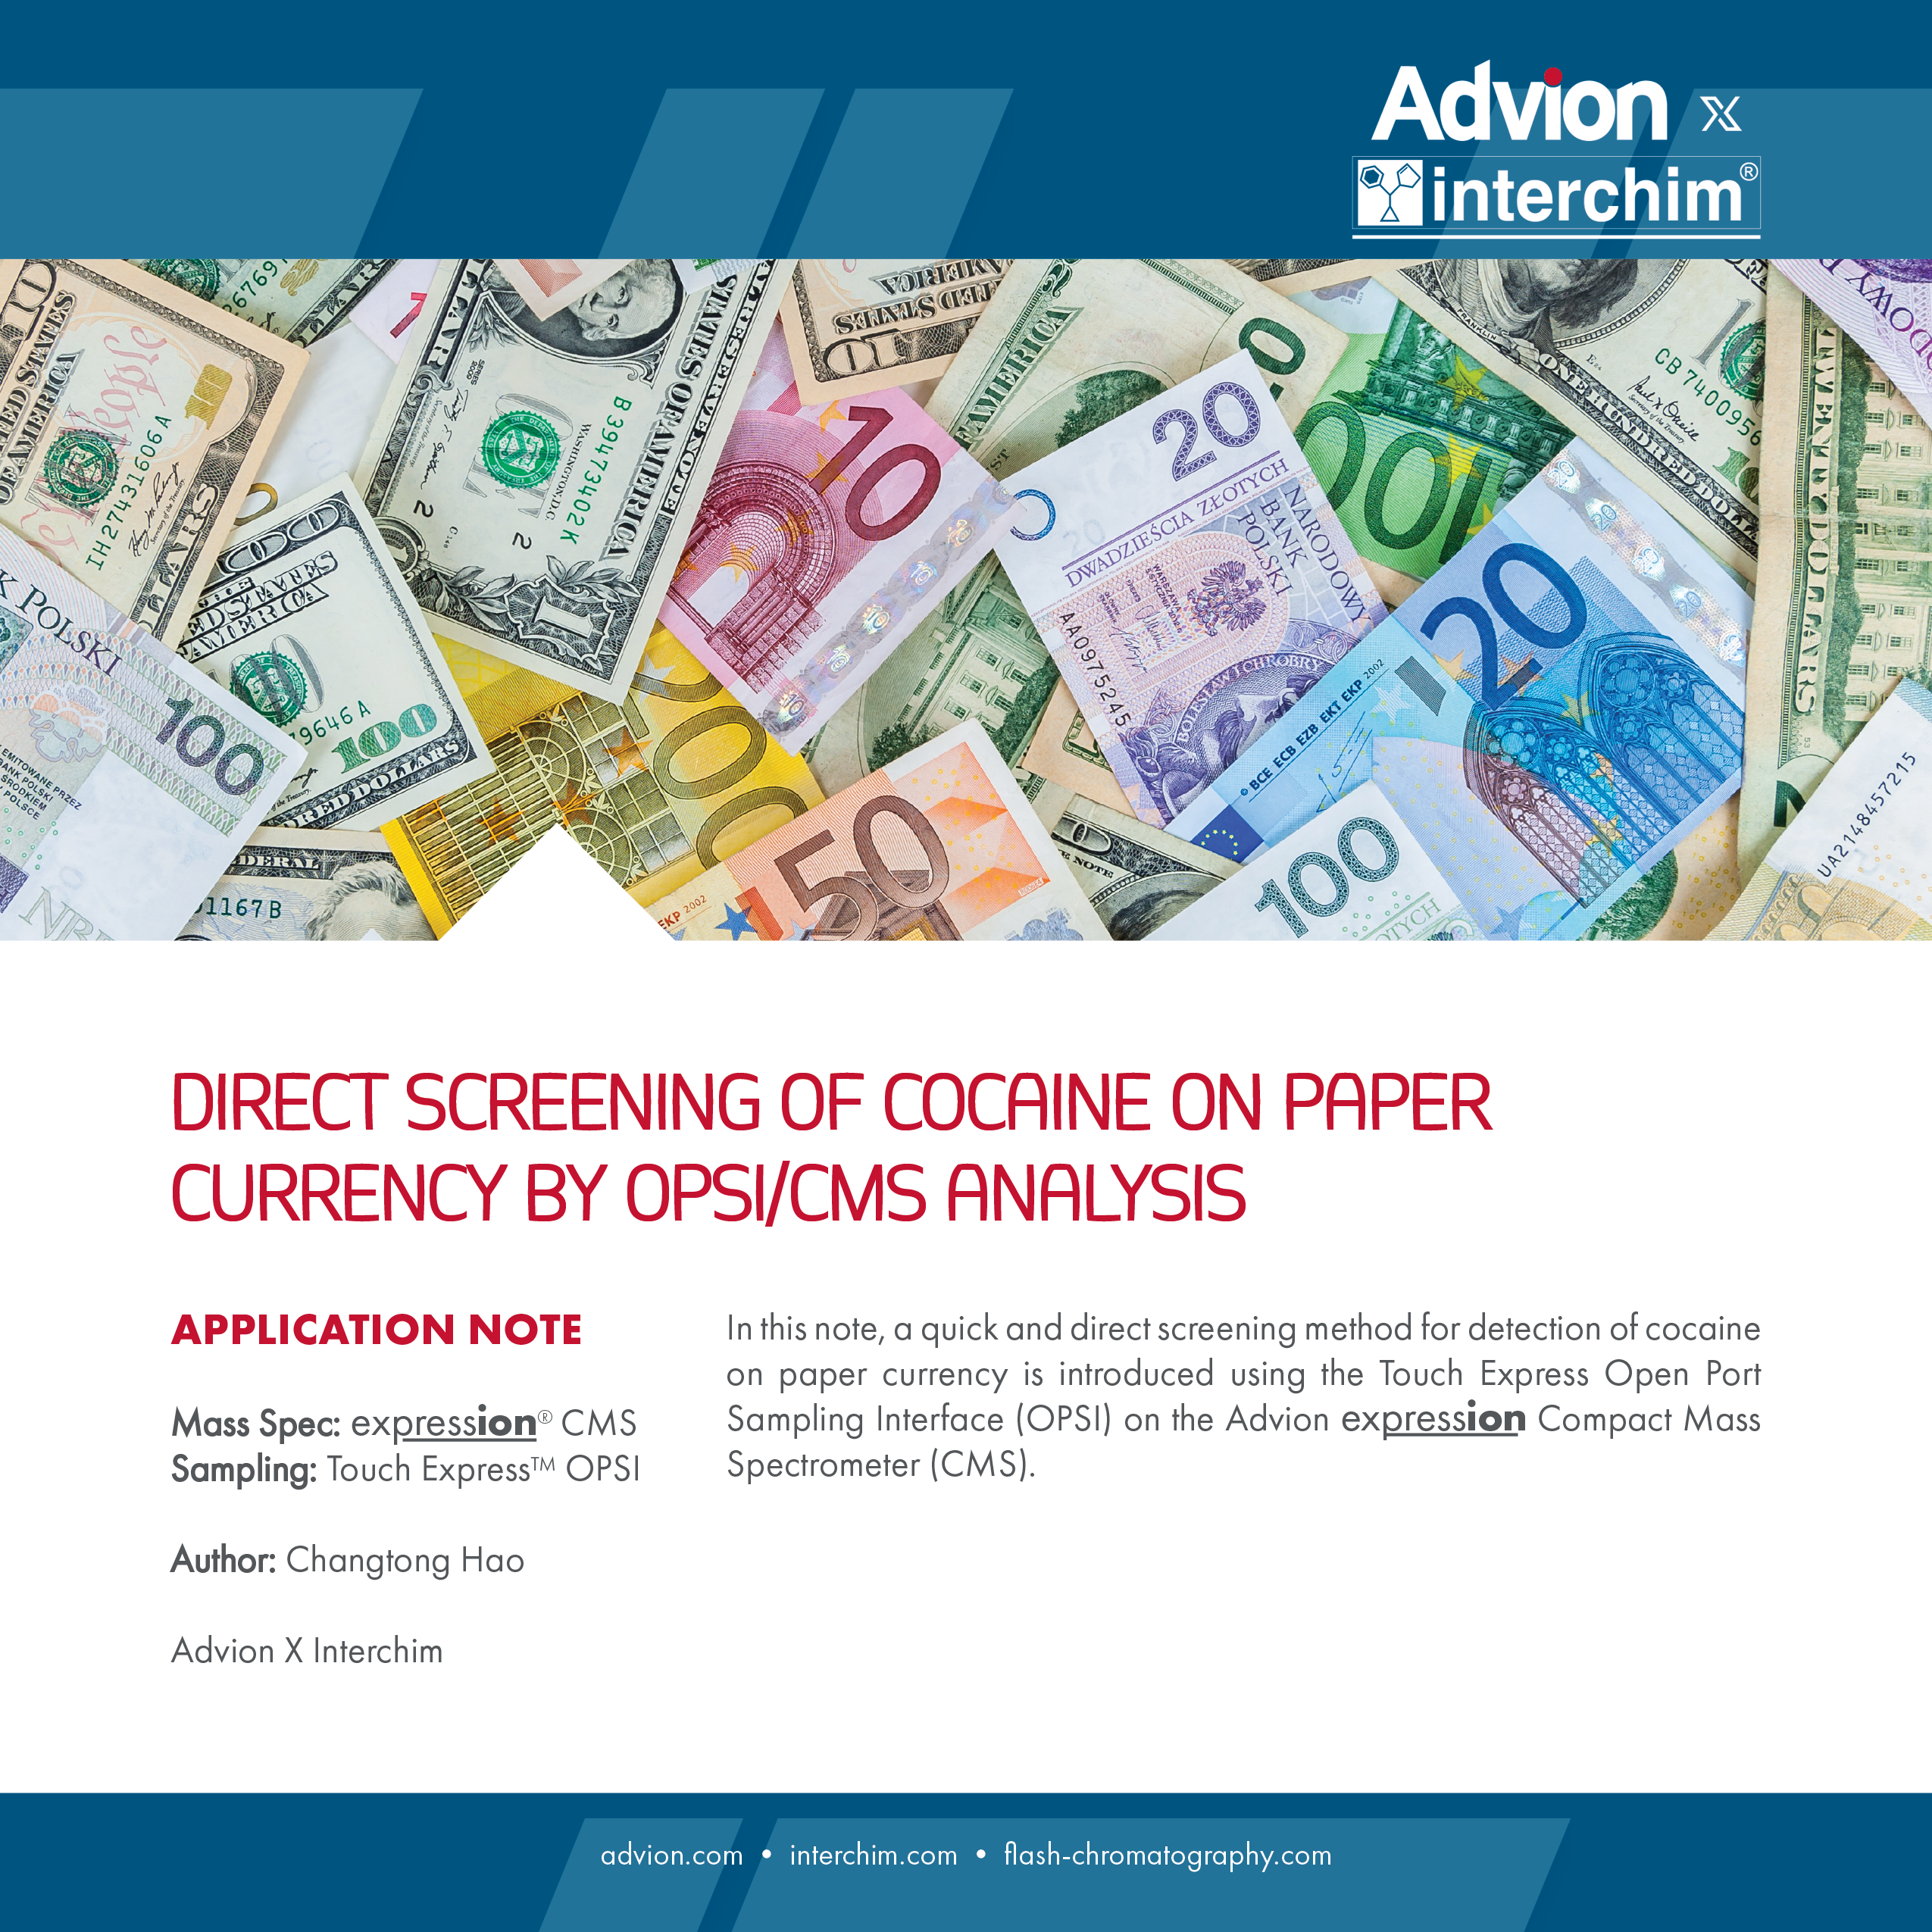 Direct Screening of Illicit Drugs on Paper Currency by OPSI/CMS Analysis